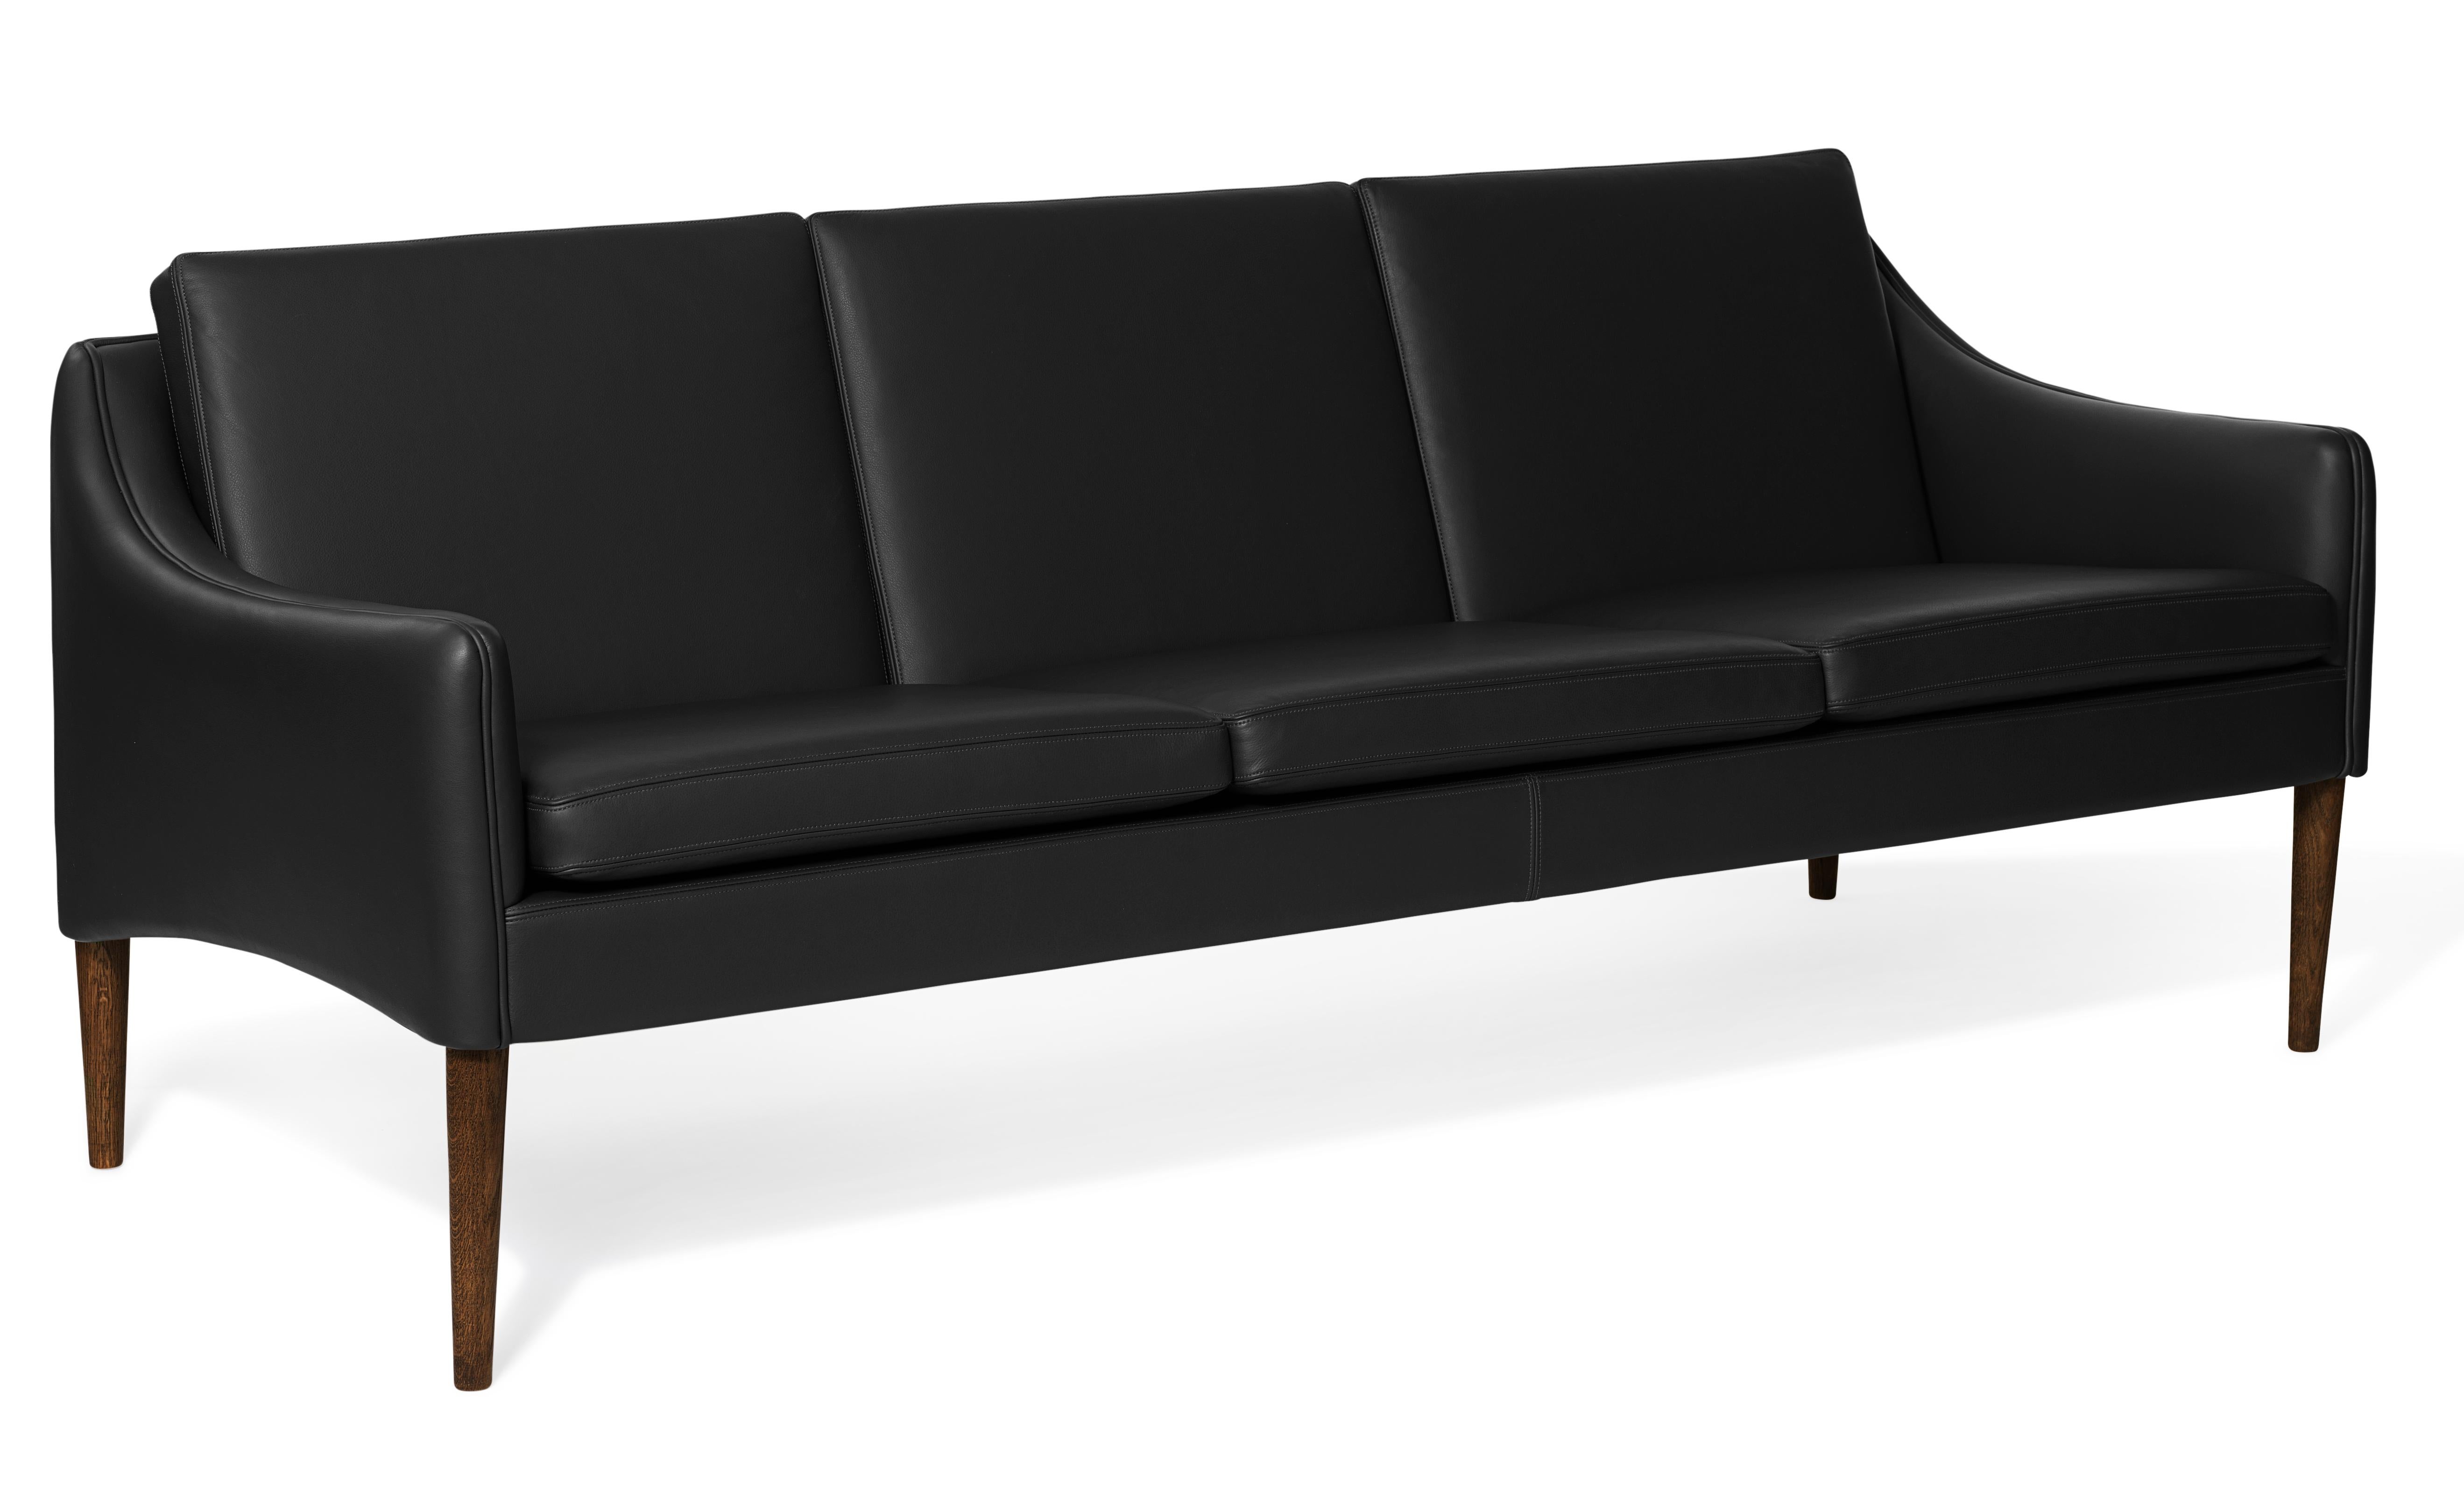 For Sale: Black (Challenger Black) Mr. Olsen 3-Seat Sofa with Walnut Legs, by Hans Olsen from Warm Nordic 2